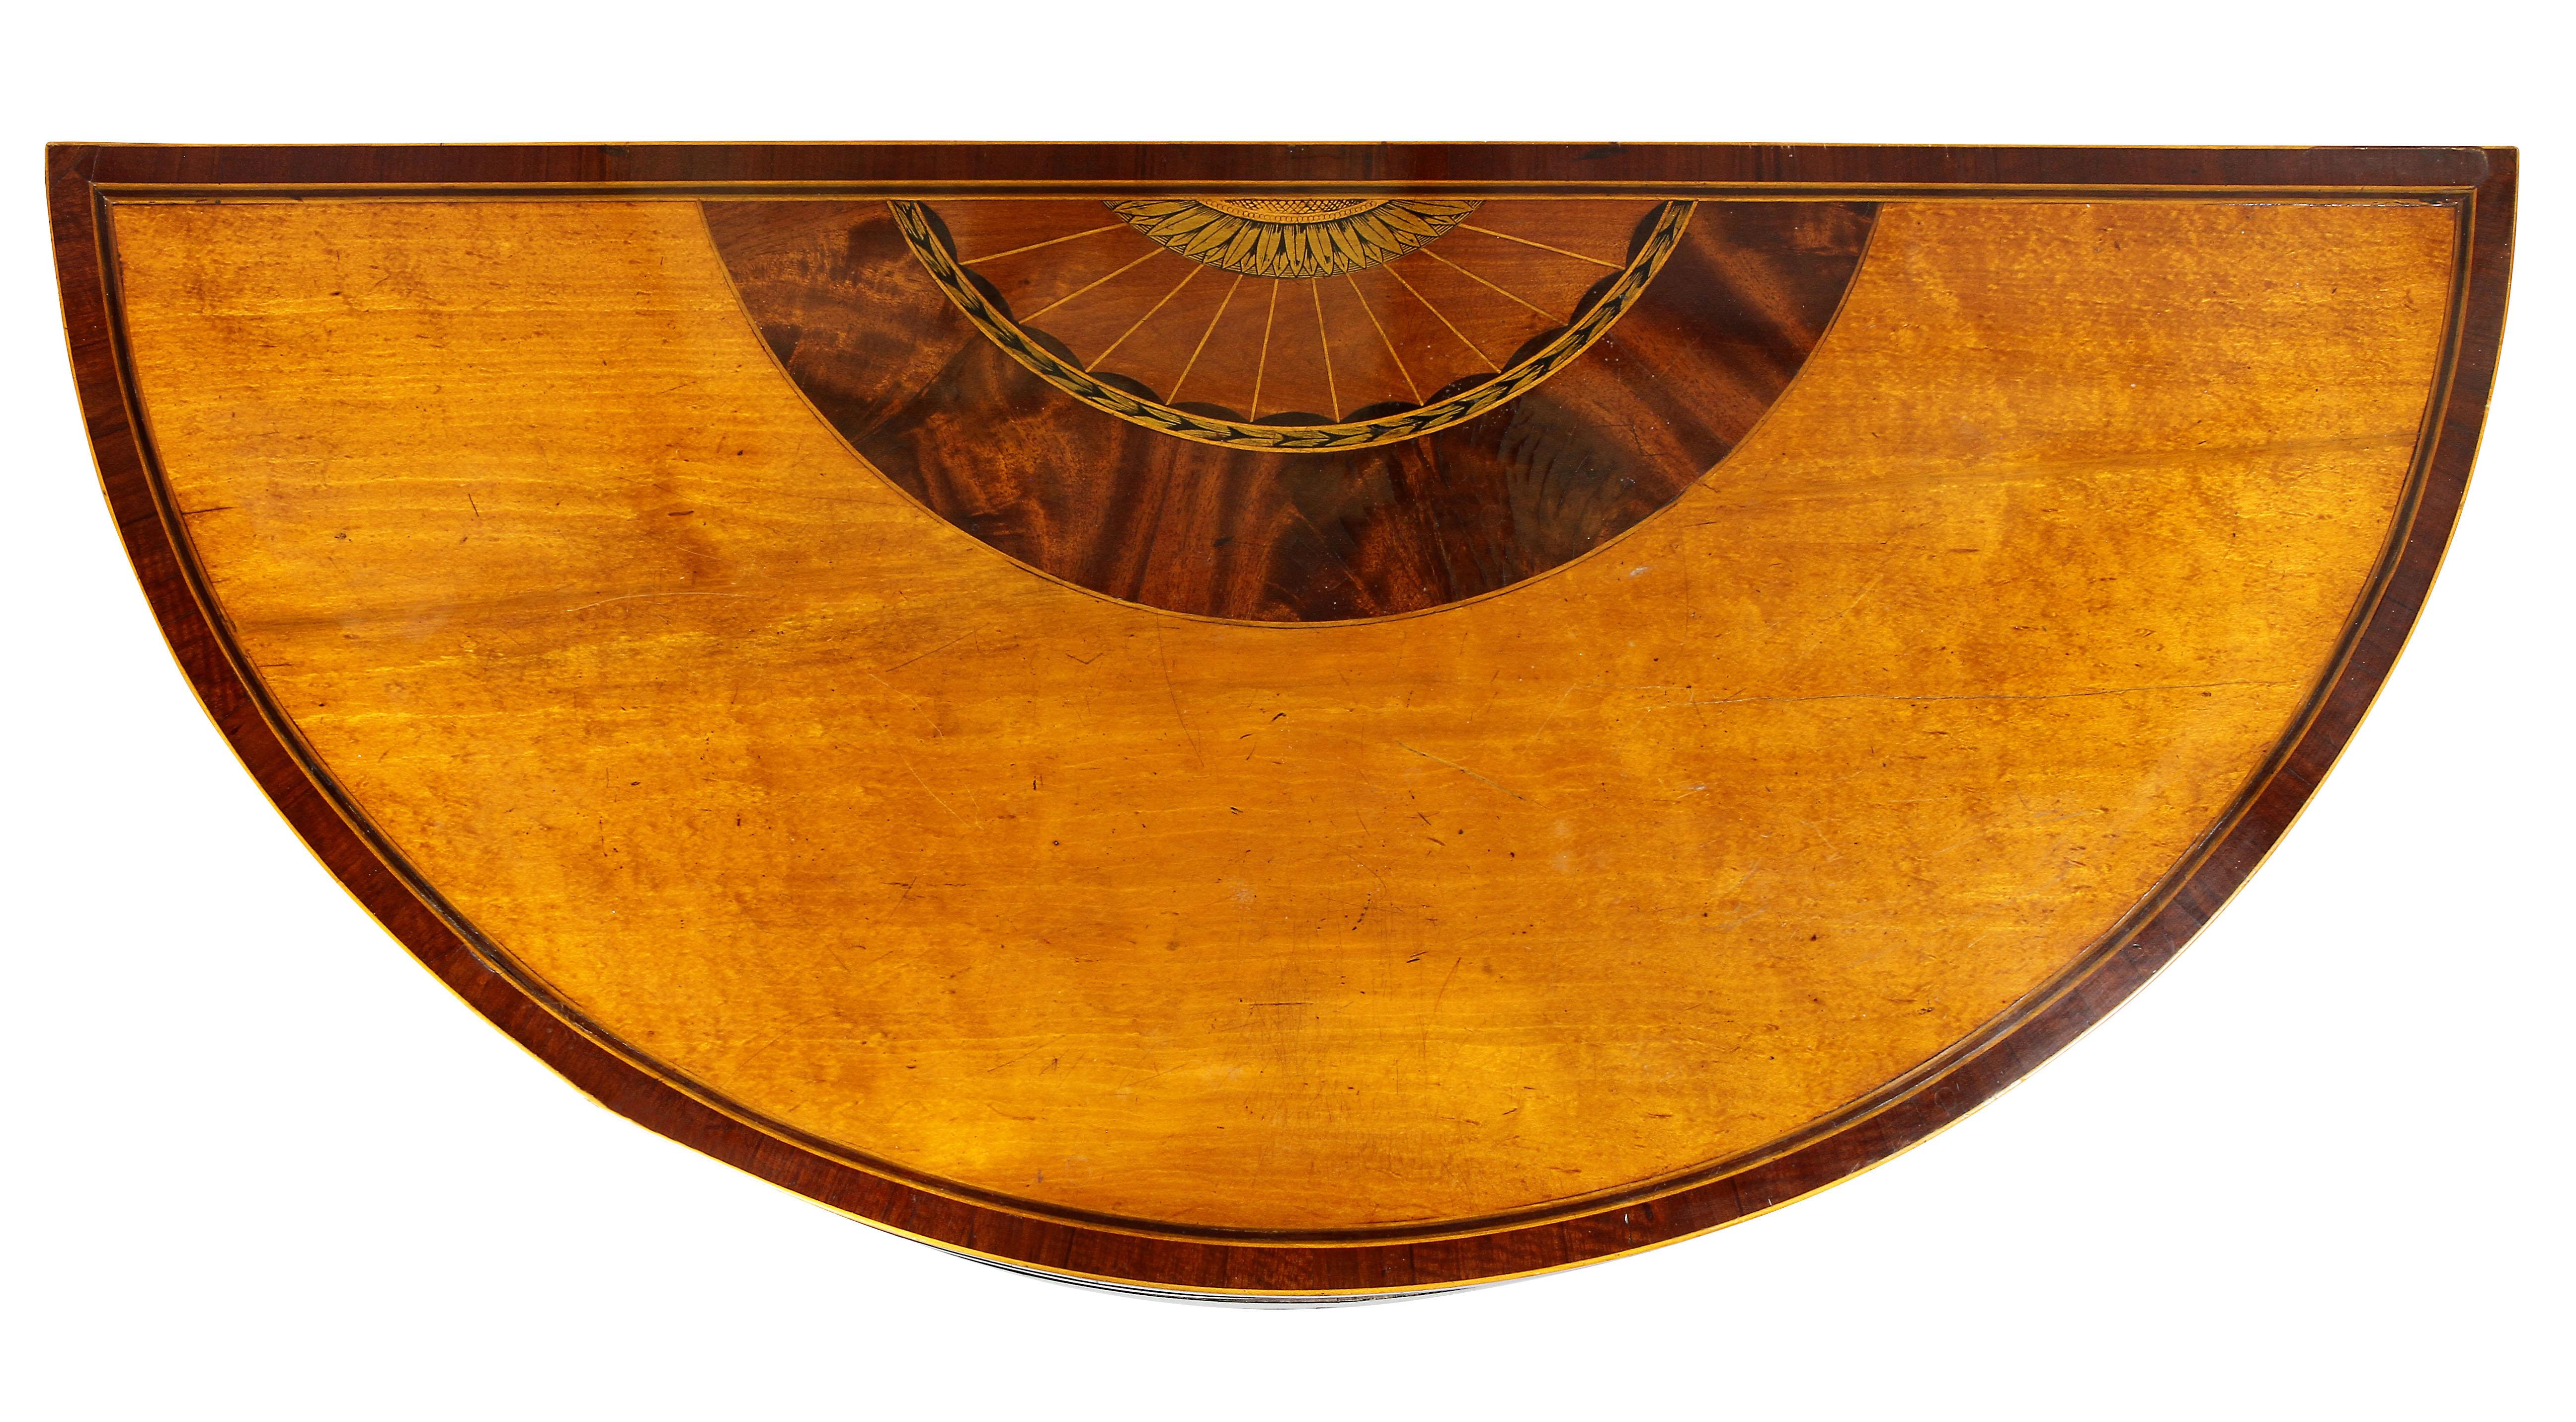 Hinged demilune with crossbanded edge and inner fan inlay, frieze with similar inlay raised on square tapered legs.